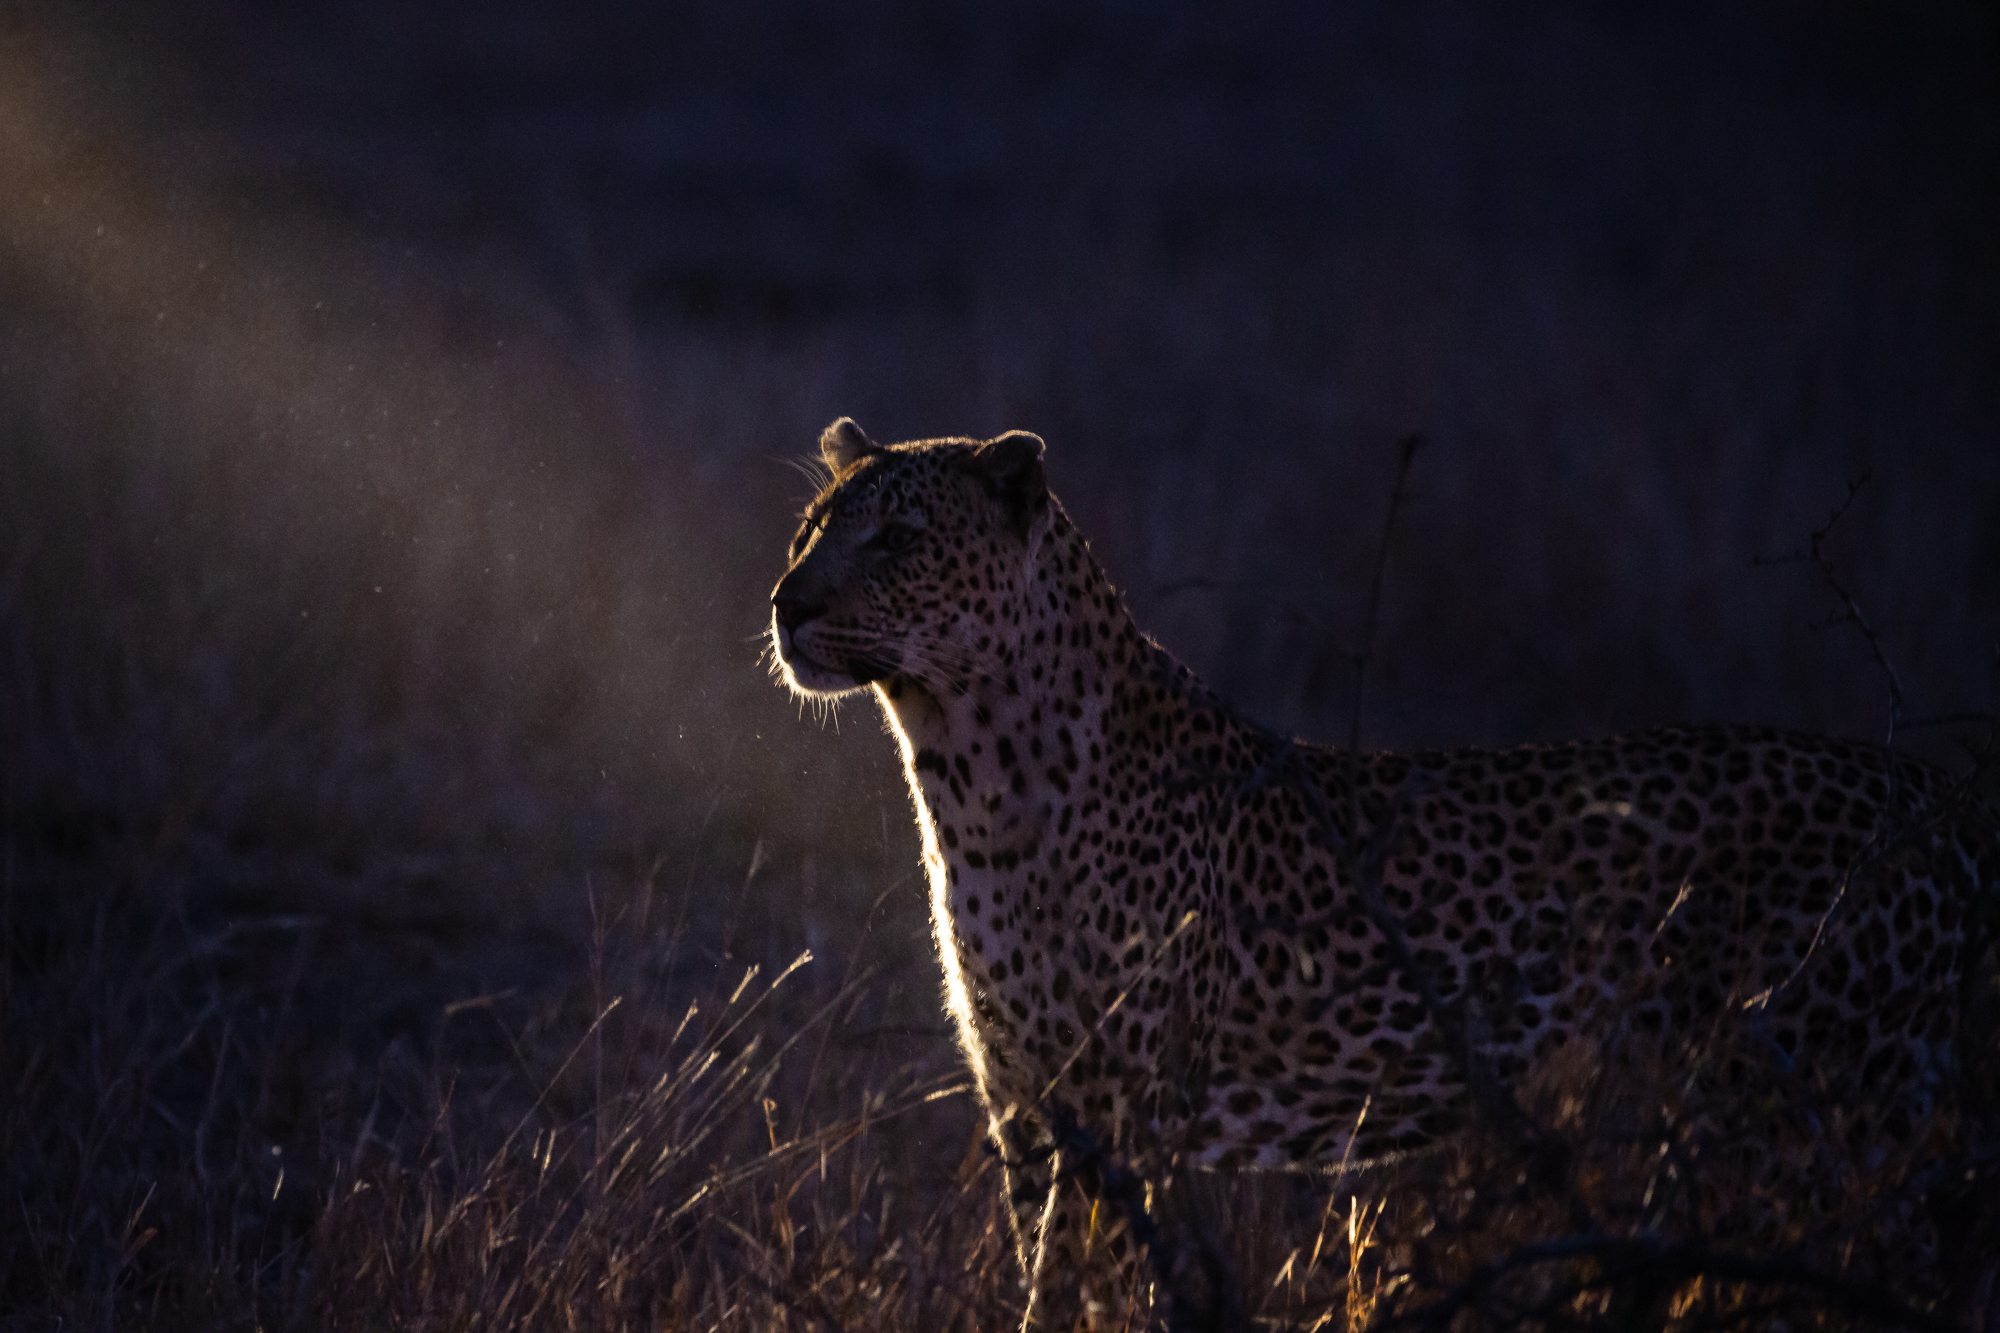 The Night of the Leopard...